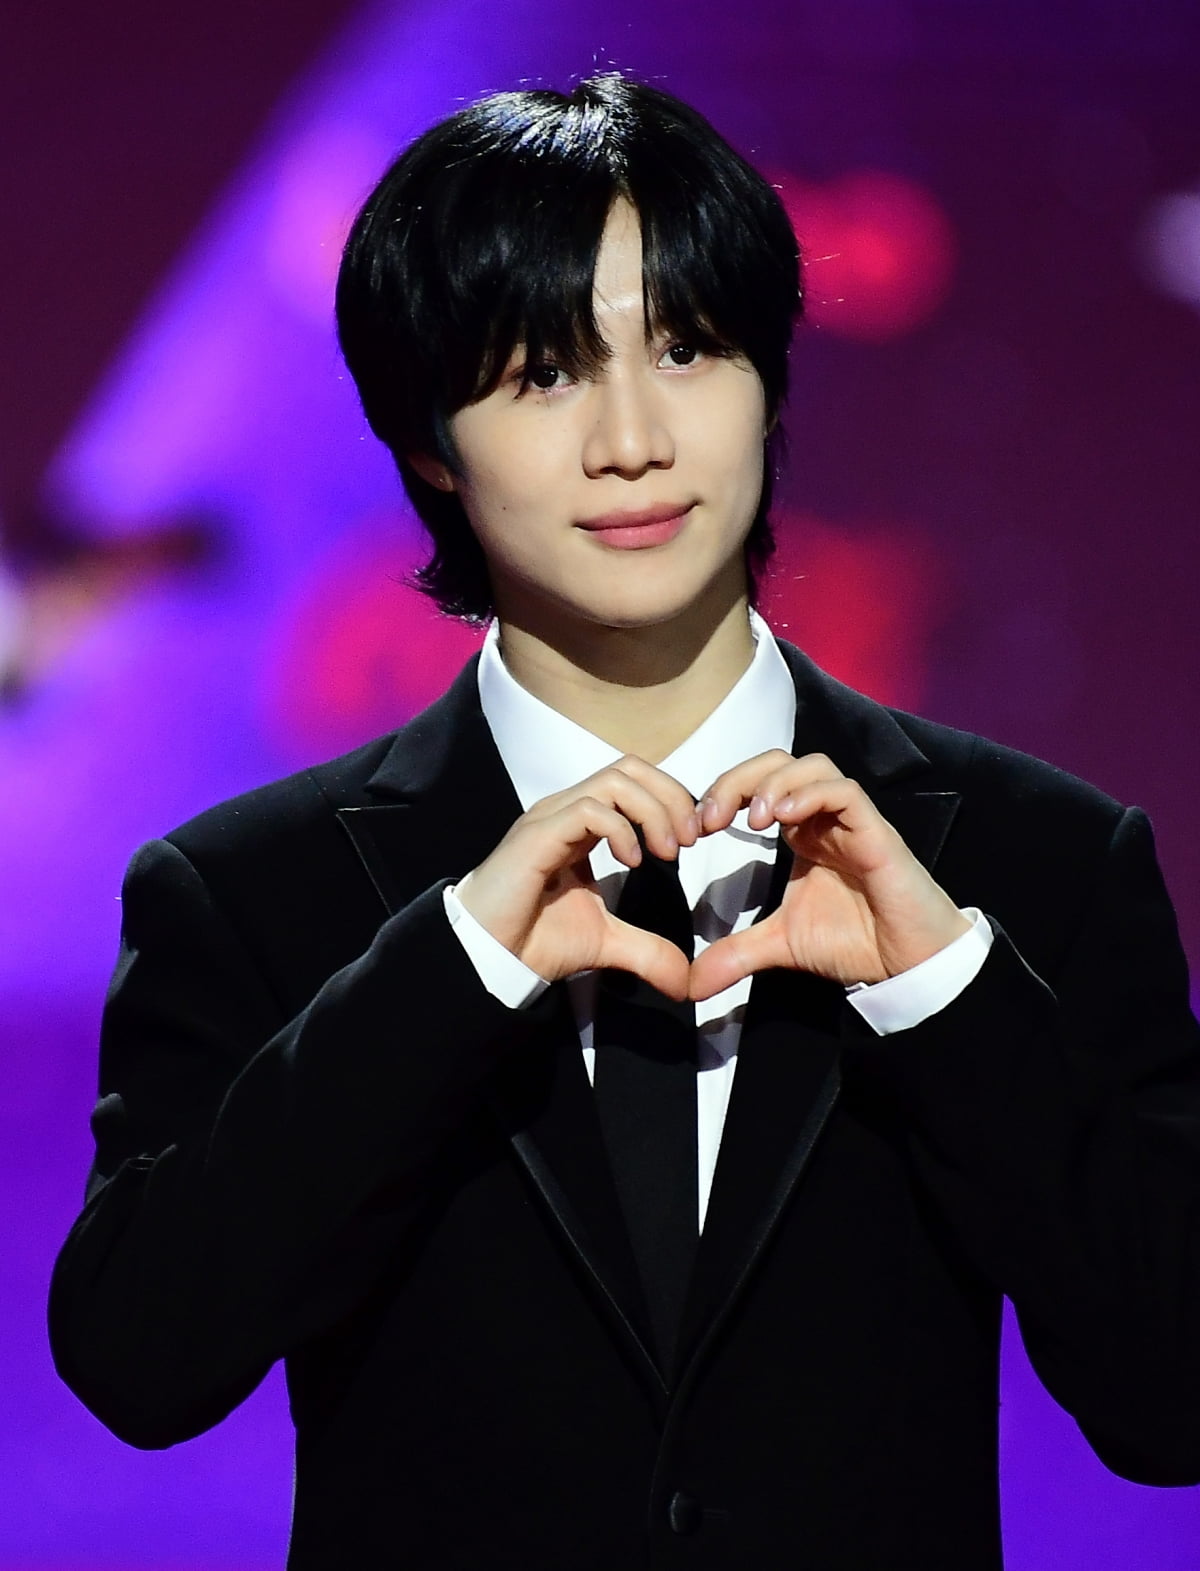 Taemin's exclusive contract with SM Entertainment ends at the end of March... In the arms of Big Planet Made